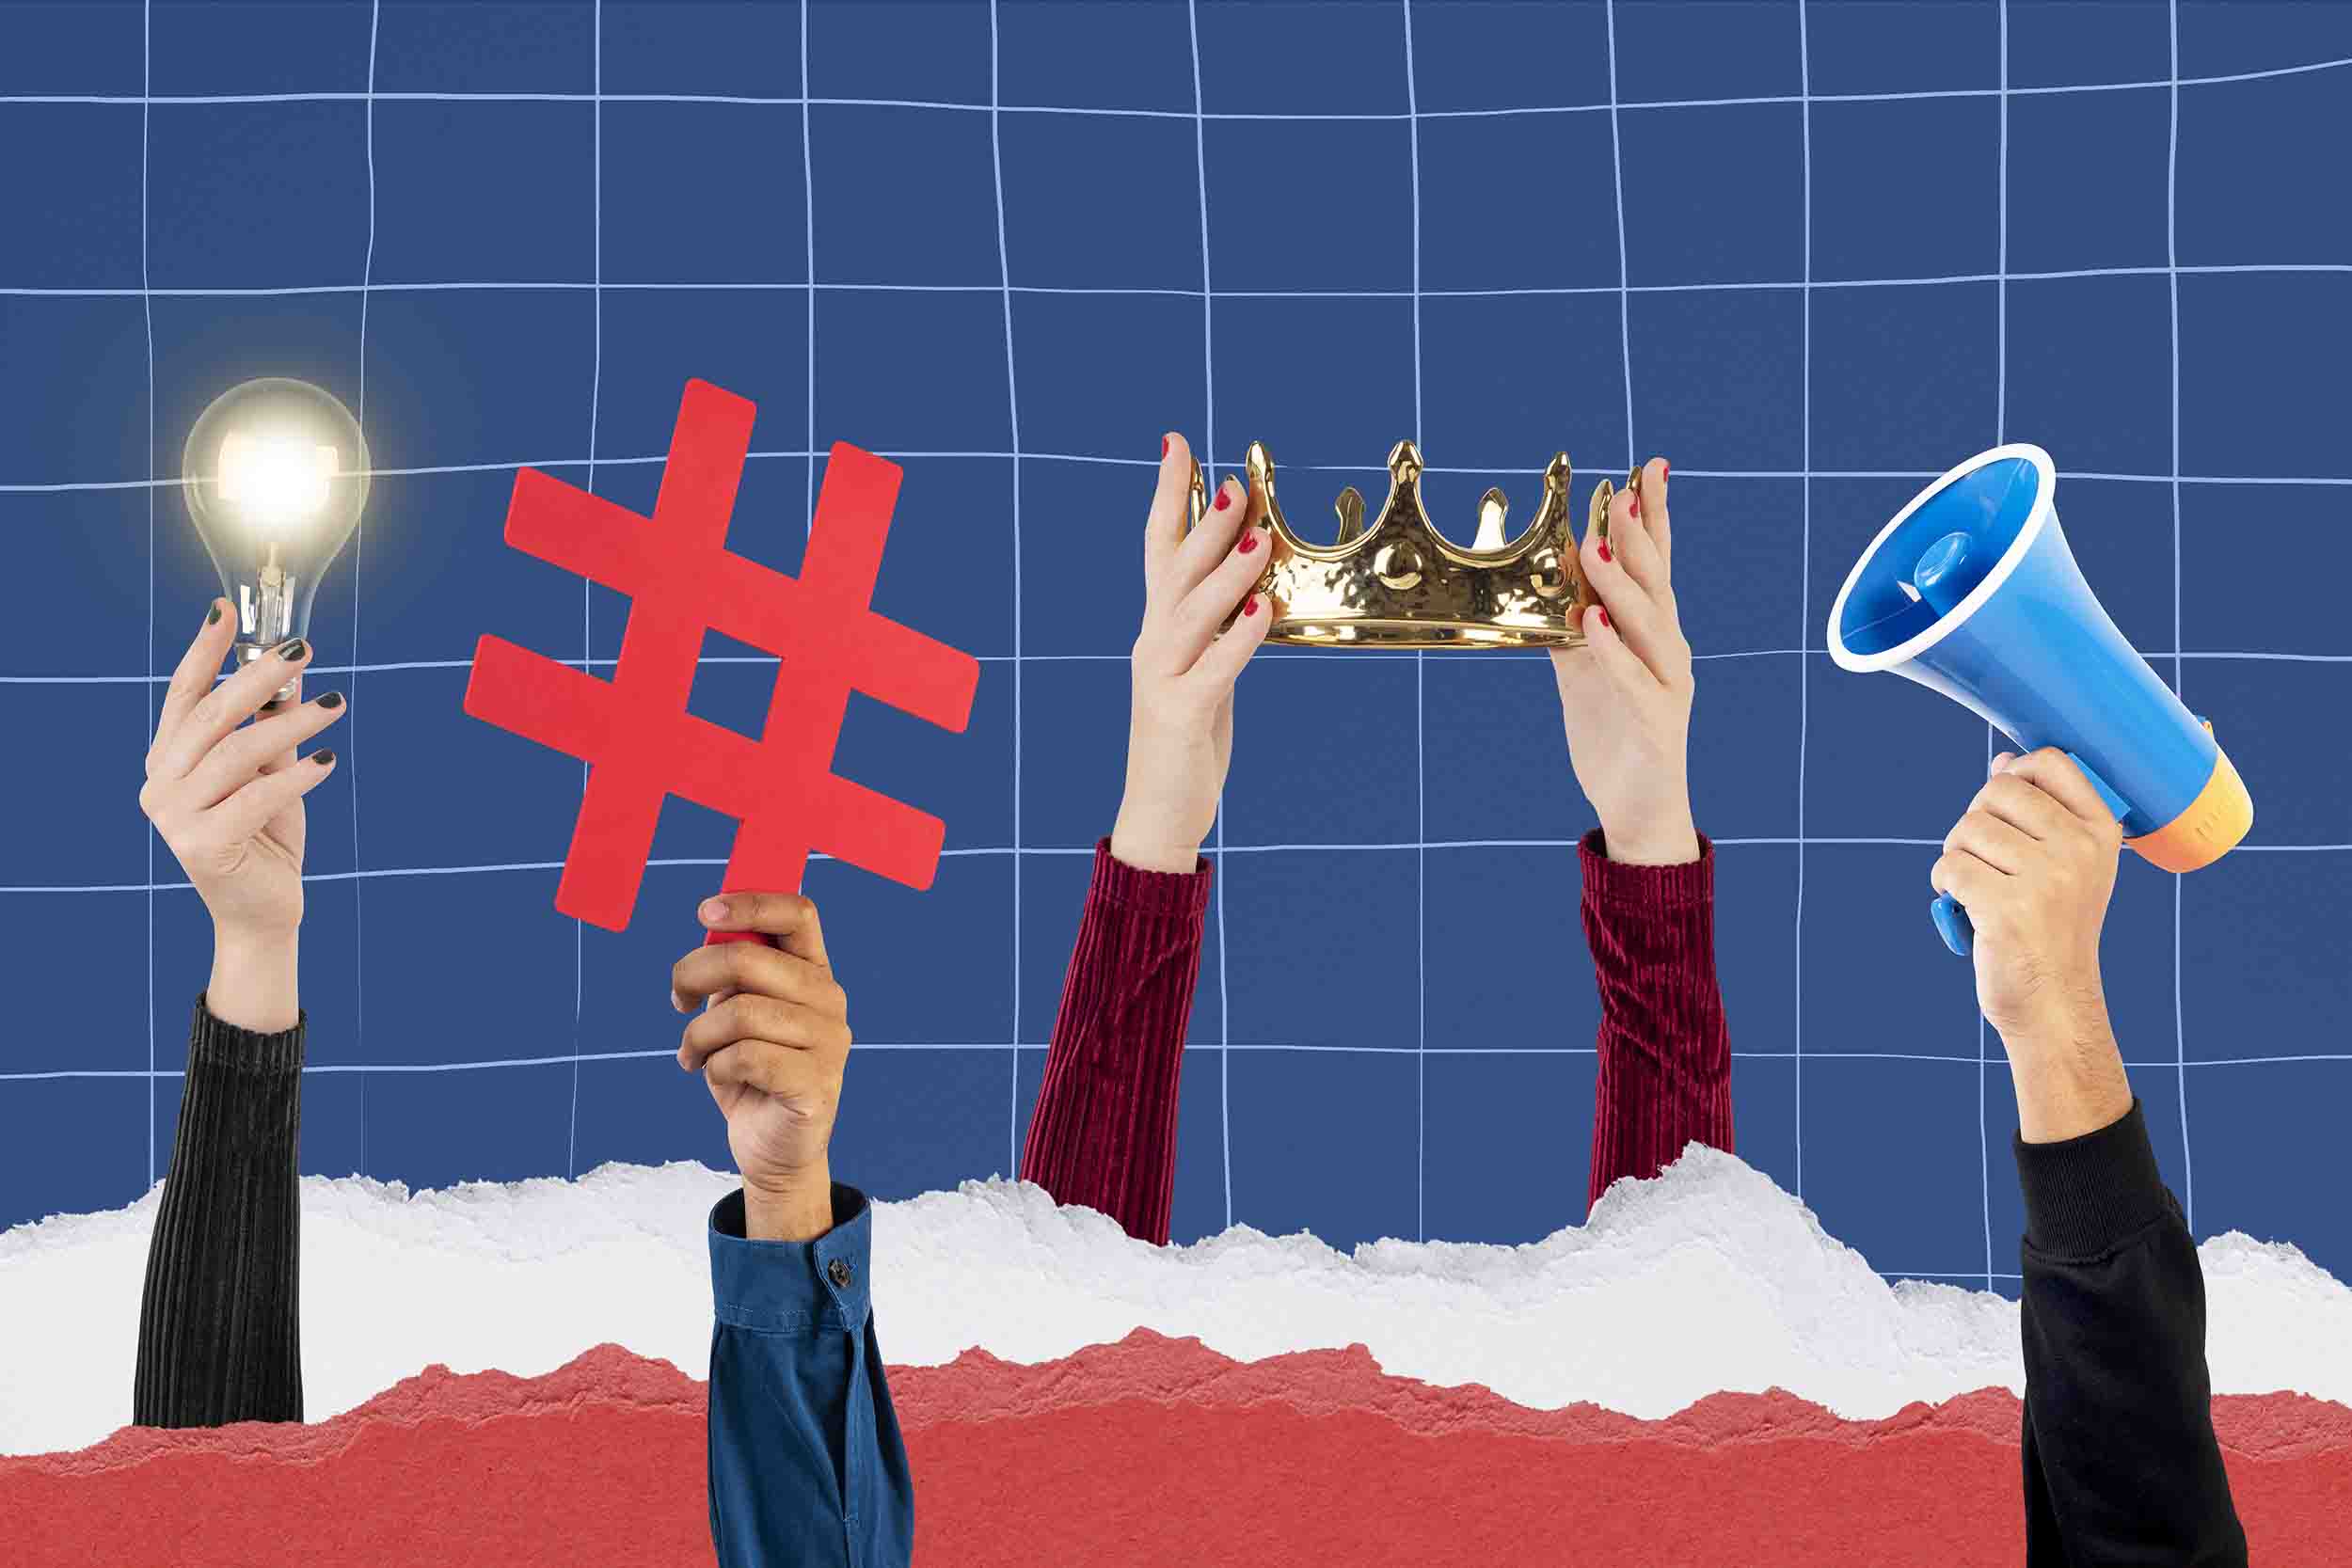 How to Use Hashtags Effectively for Your Brand